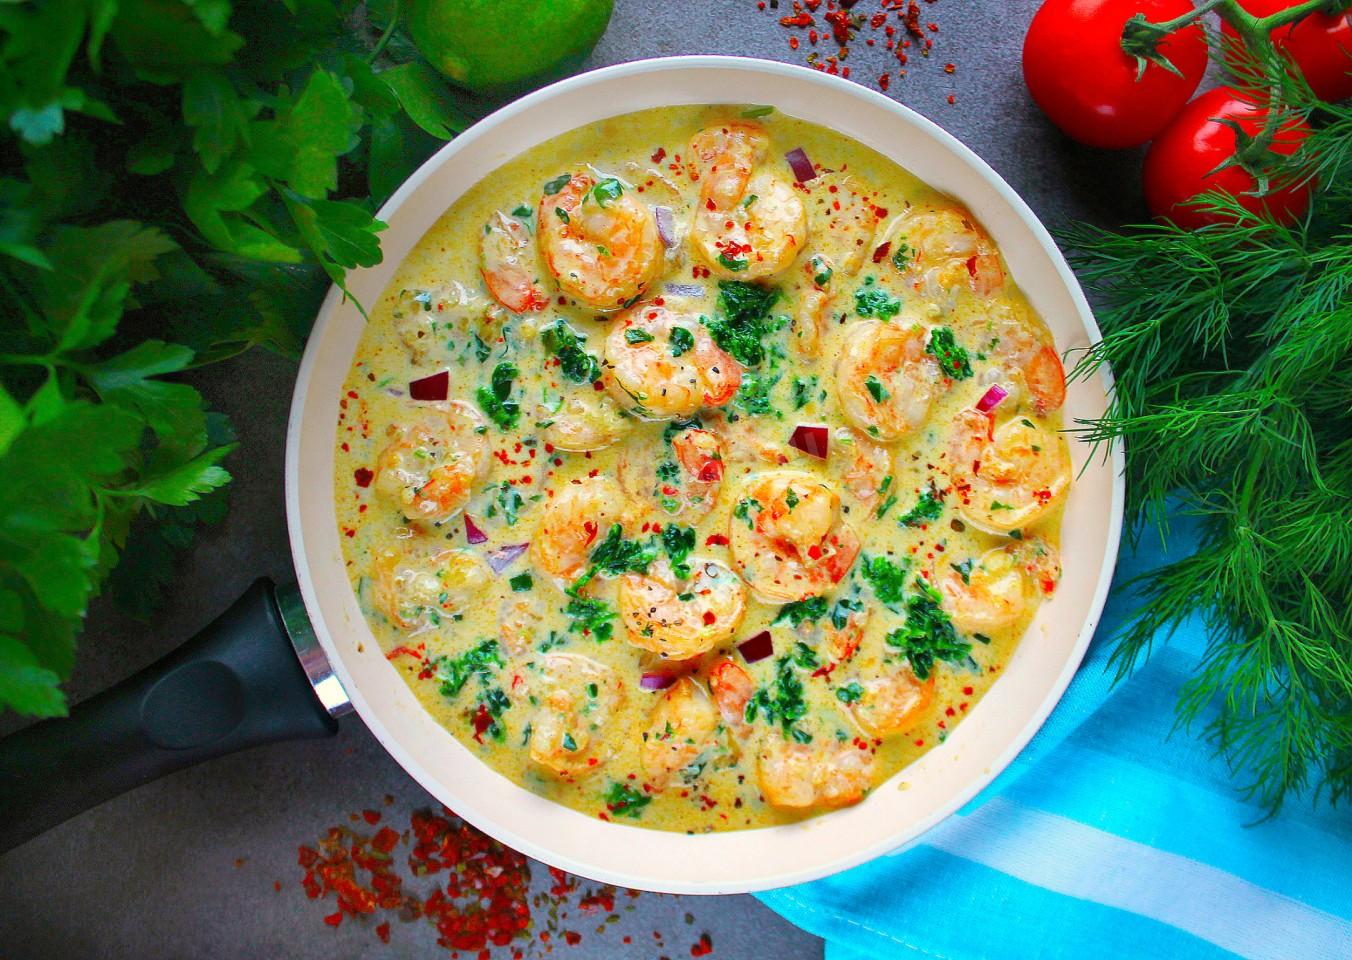 SHRIMPS IN CREAMY GARLIC SAUCE WITH CHEESE